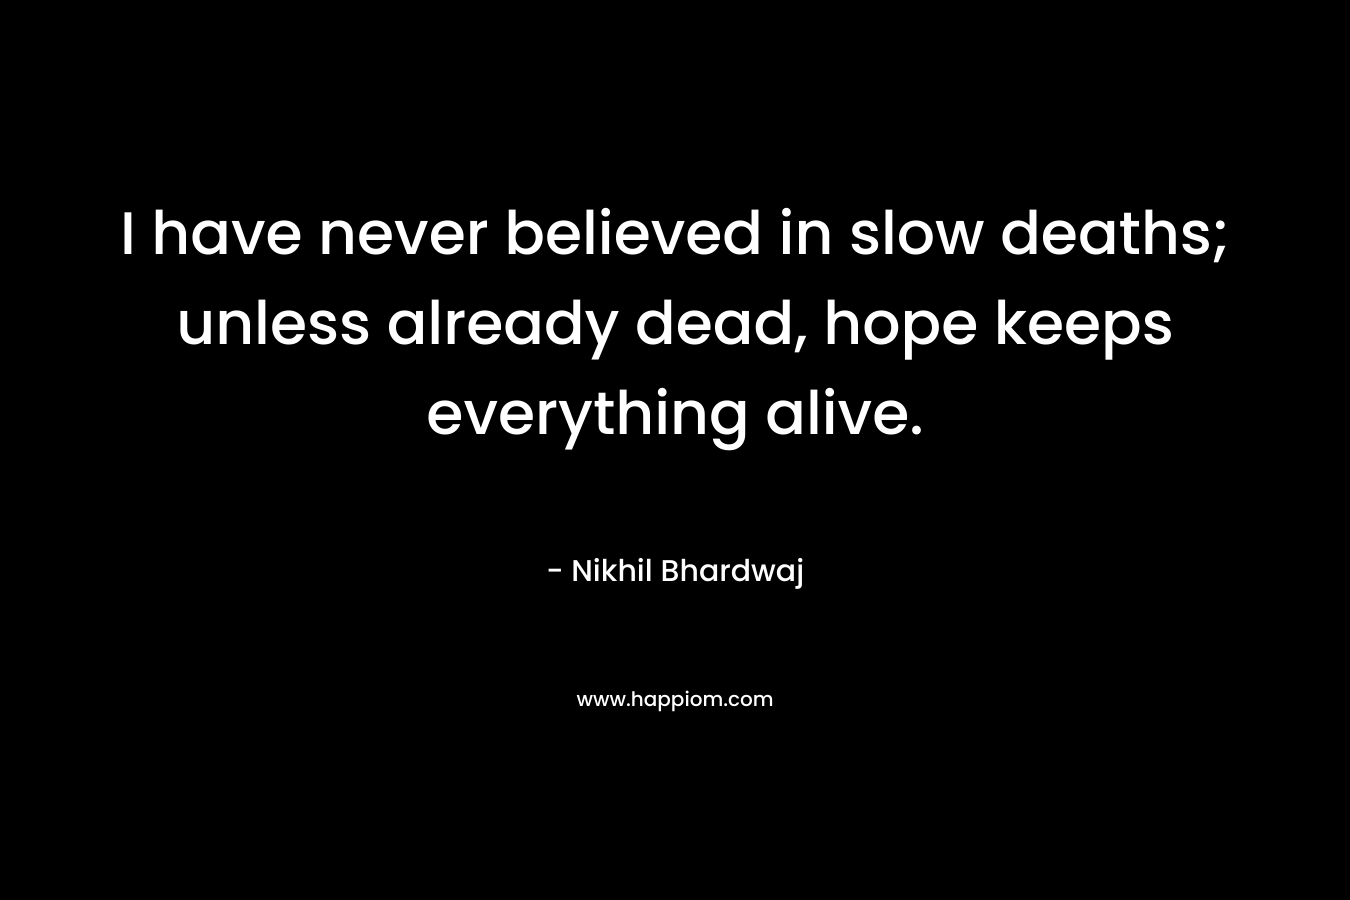 I have never believed in slow deaths; unless already dead, hope keeps everything alive. – Nikhil Bhardwaj